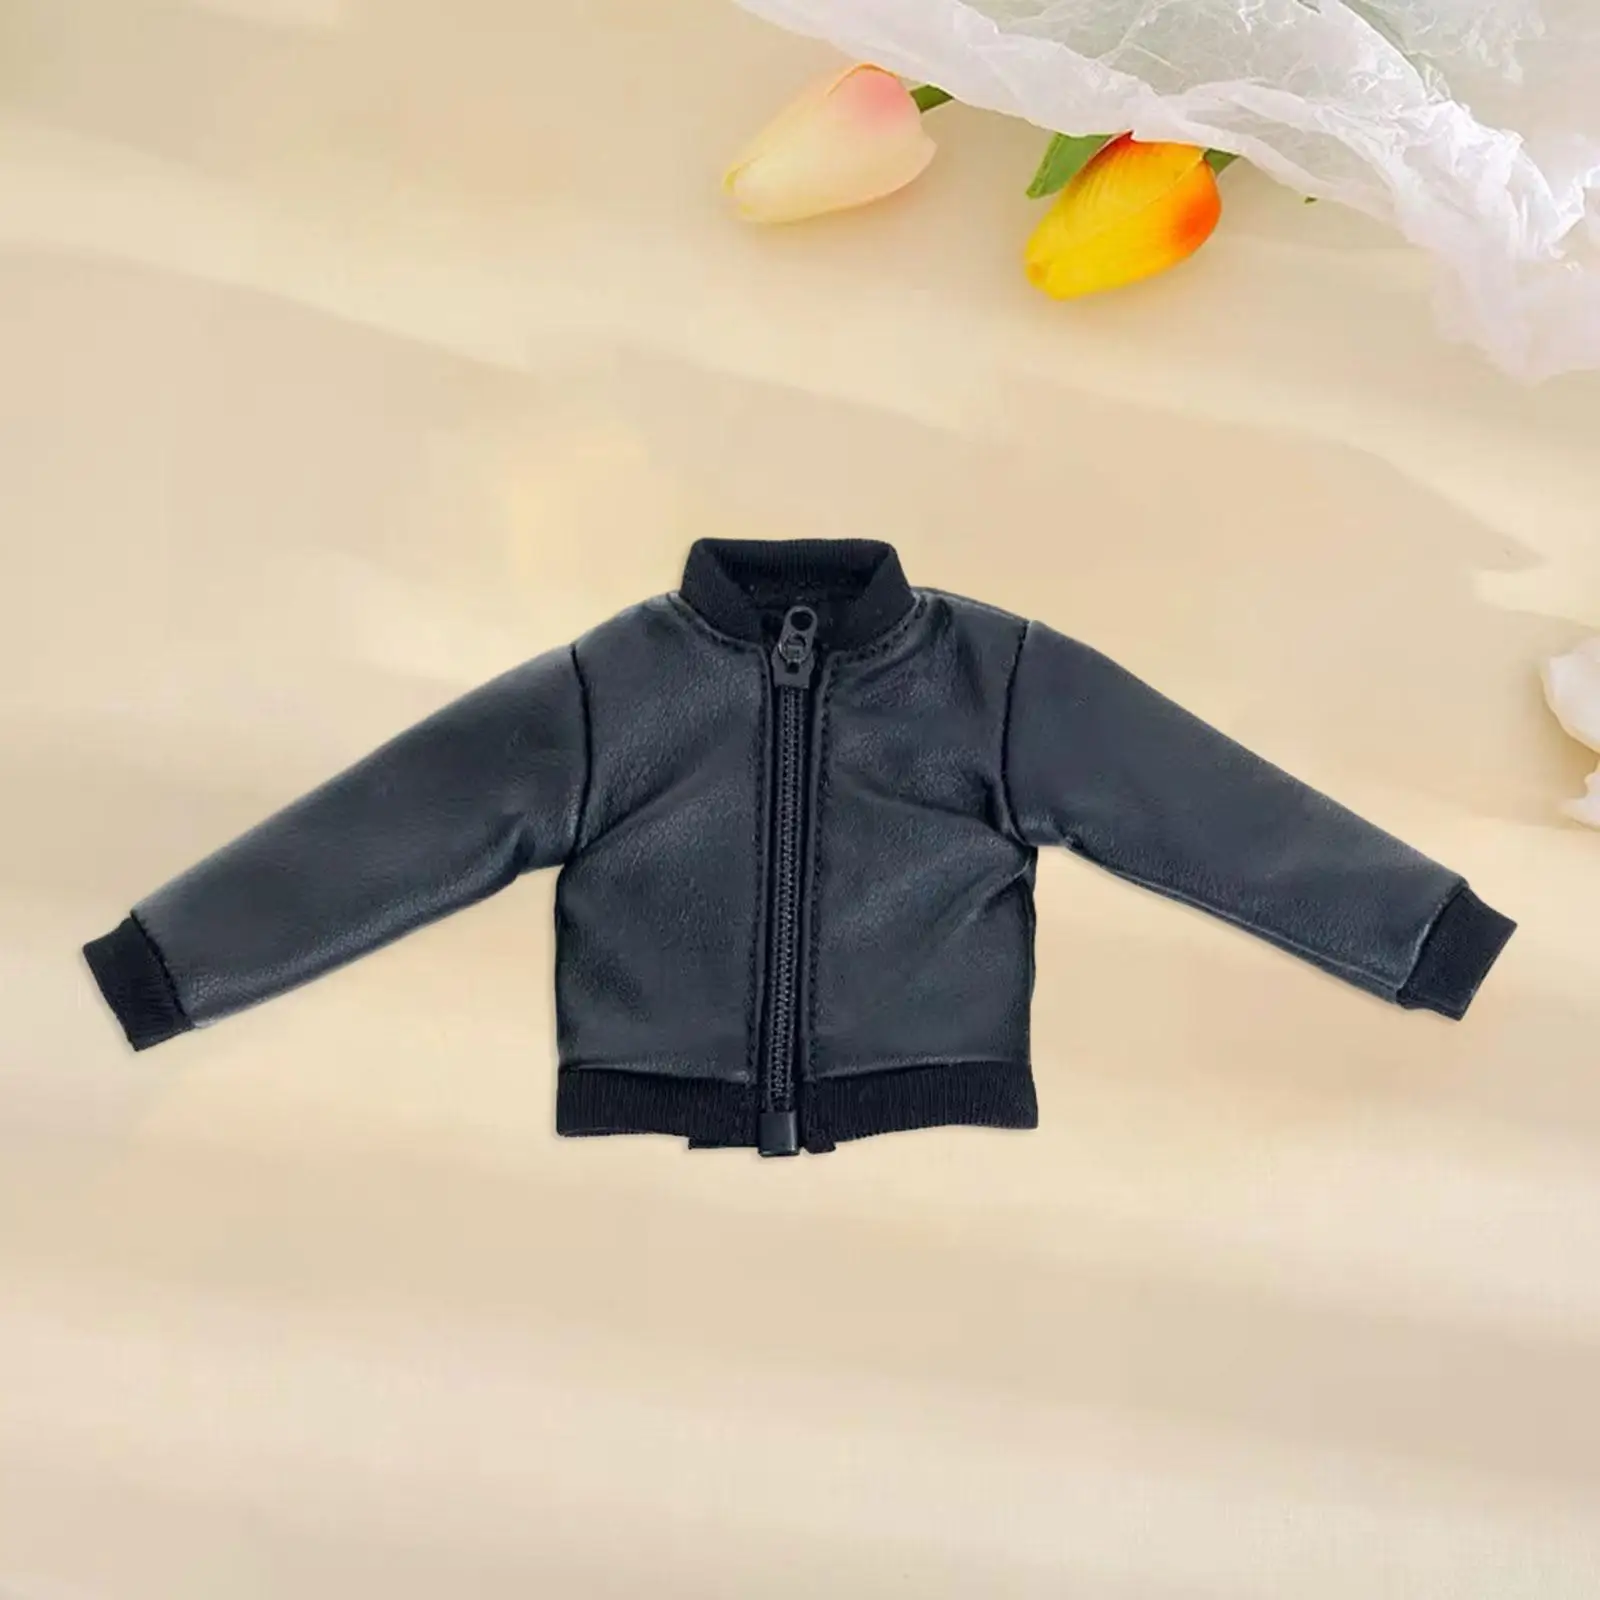 1/12 PU Leather Jacket Modern Doll Clothes for 6`` Male Dolls Soldier Figure